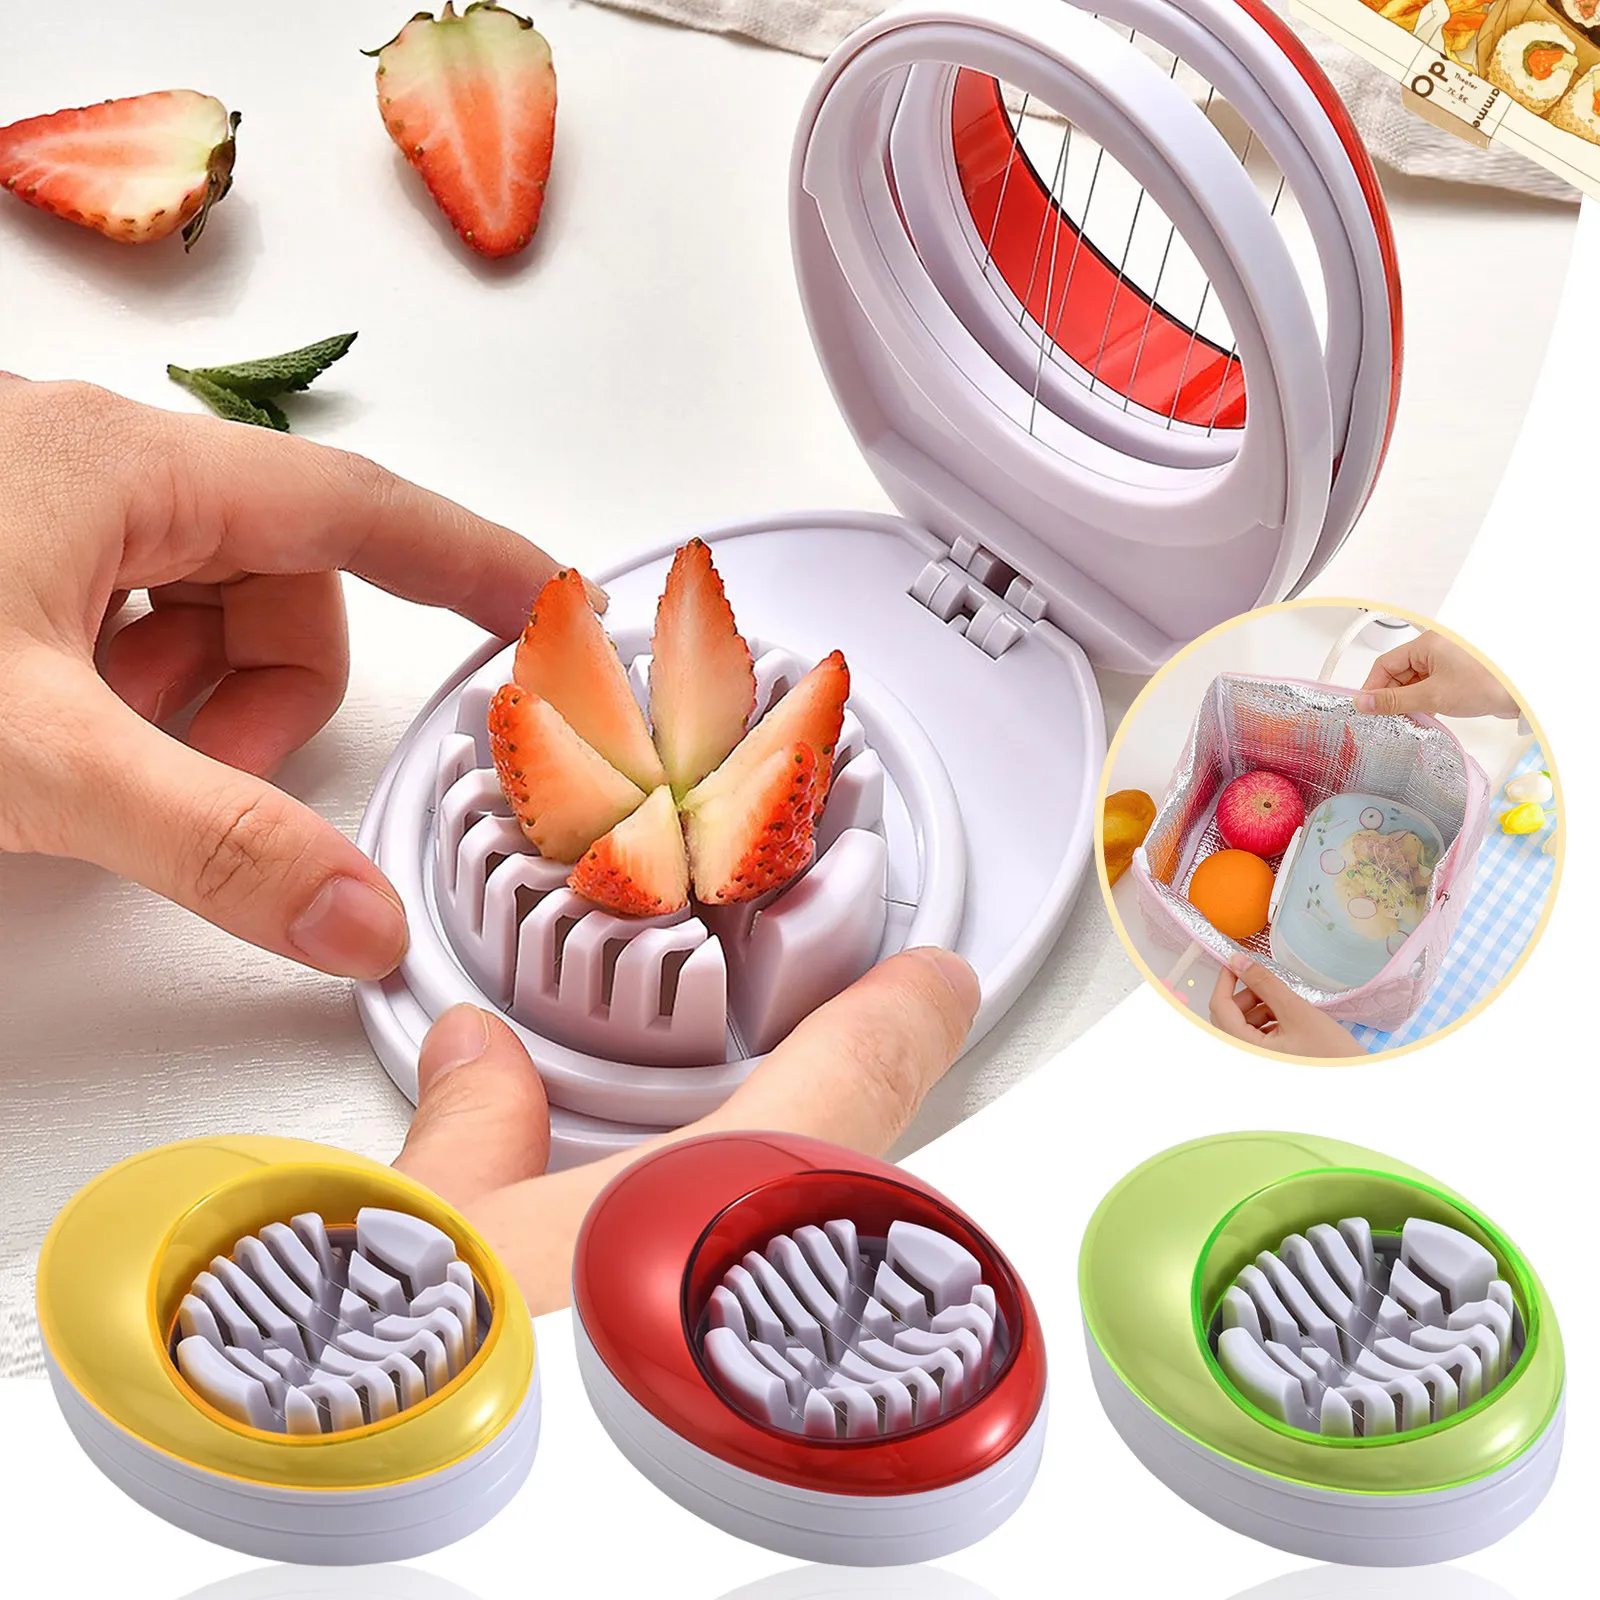 https://ae01.alicdn.com/kf/Sc07588c4c7214be4a21c54429972fc3aN/Egg-Slicer-for-Hard-Boiled-Eggs-Easy-to-Cut-Egg-into-Slices-Wedge-and-Dices-Sturdy.jpg